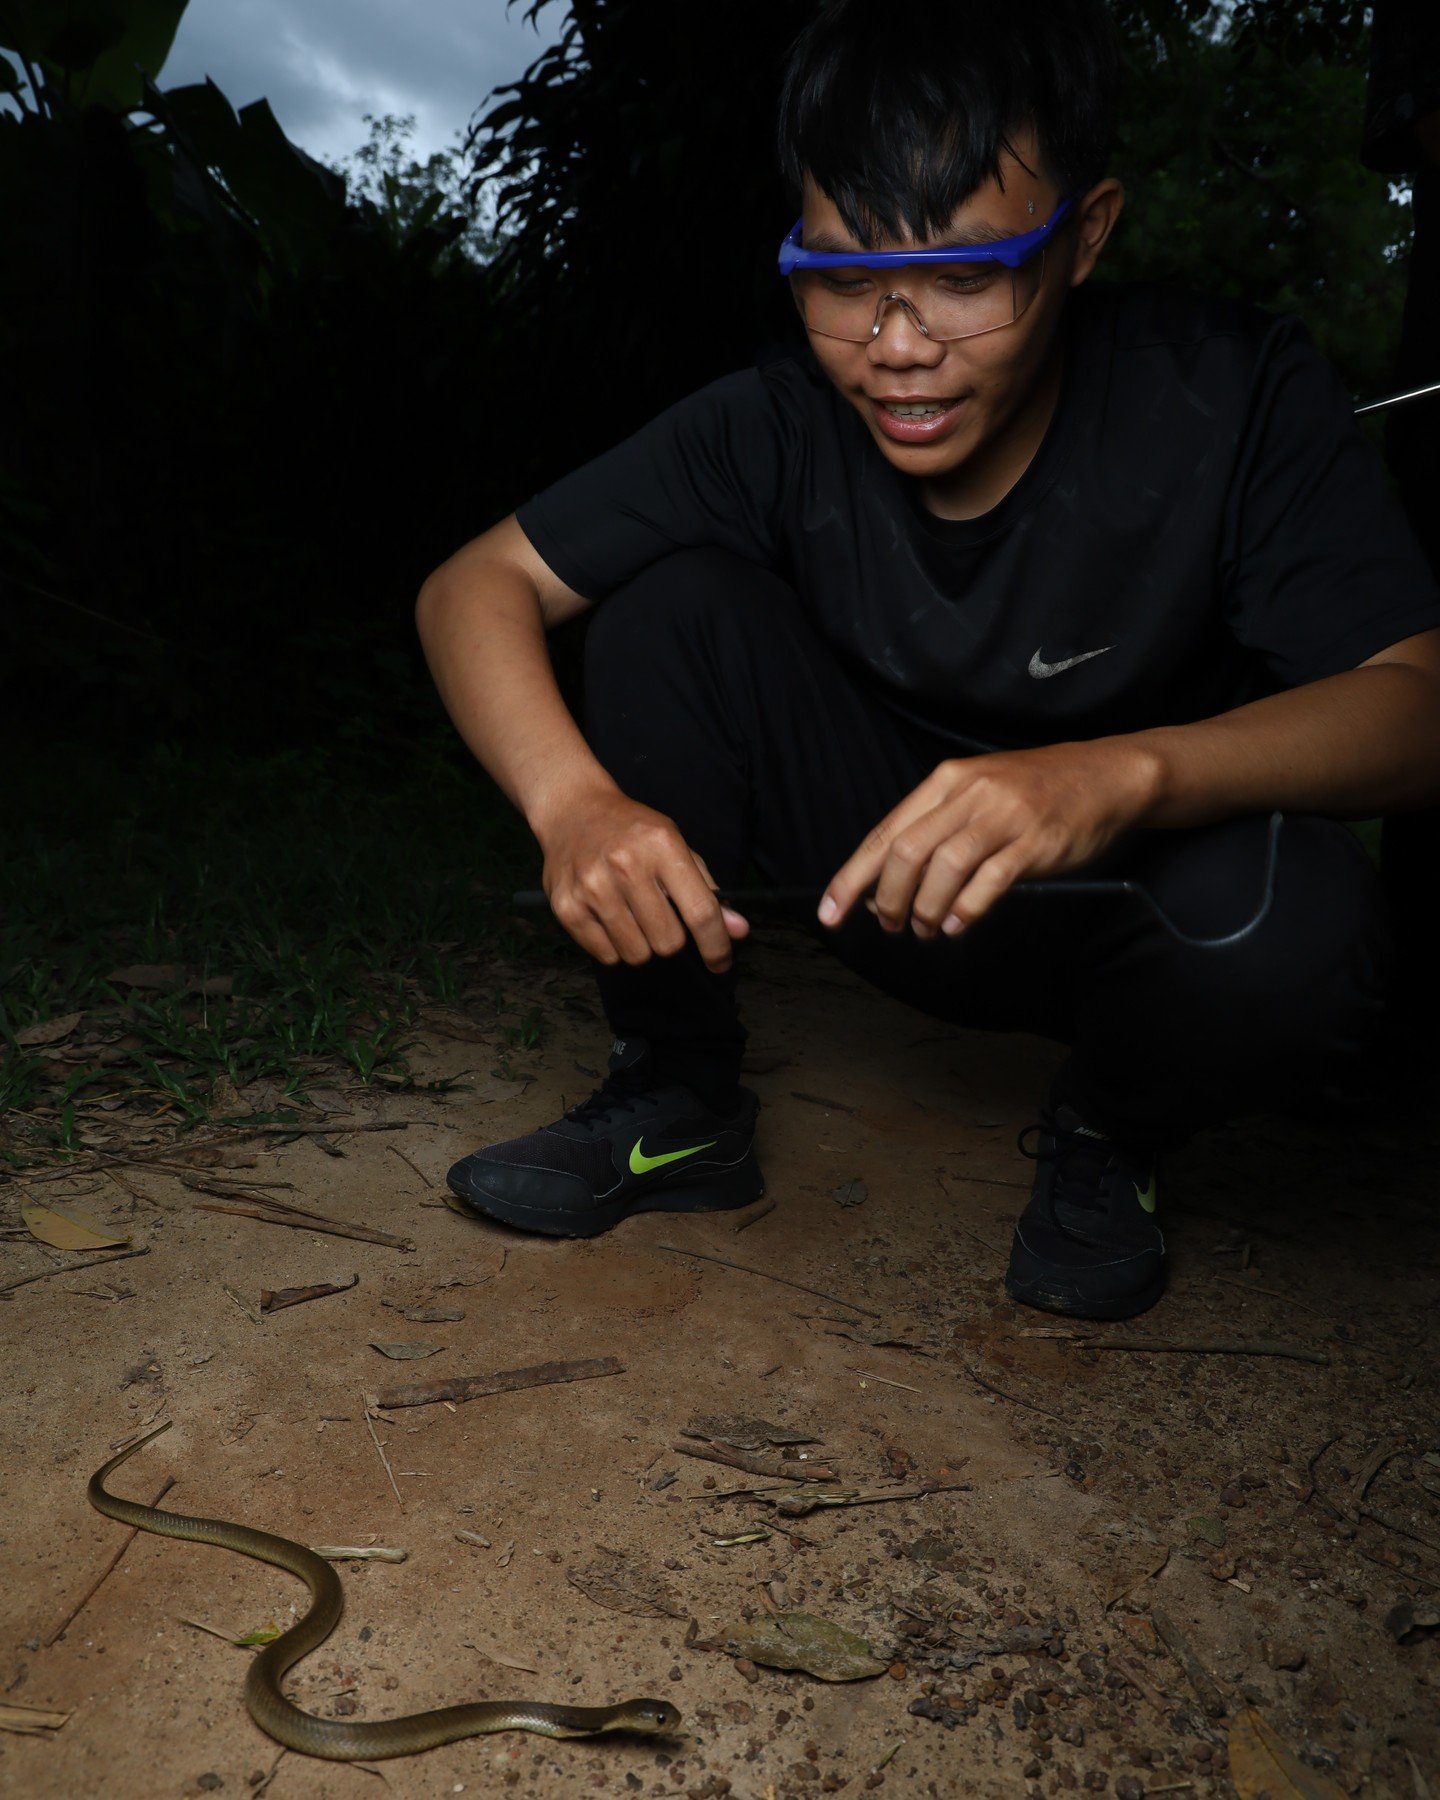 Even if its a little child, we must always be fully equipped with protective gear
#instagood #photooftheday #beautiful #nature #tour #venomous #tropicalherping #mantisofinstagram #herping #herpingtheglobe #vietnam #snake #photography #wildlife #wildl